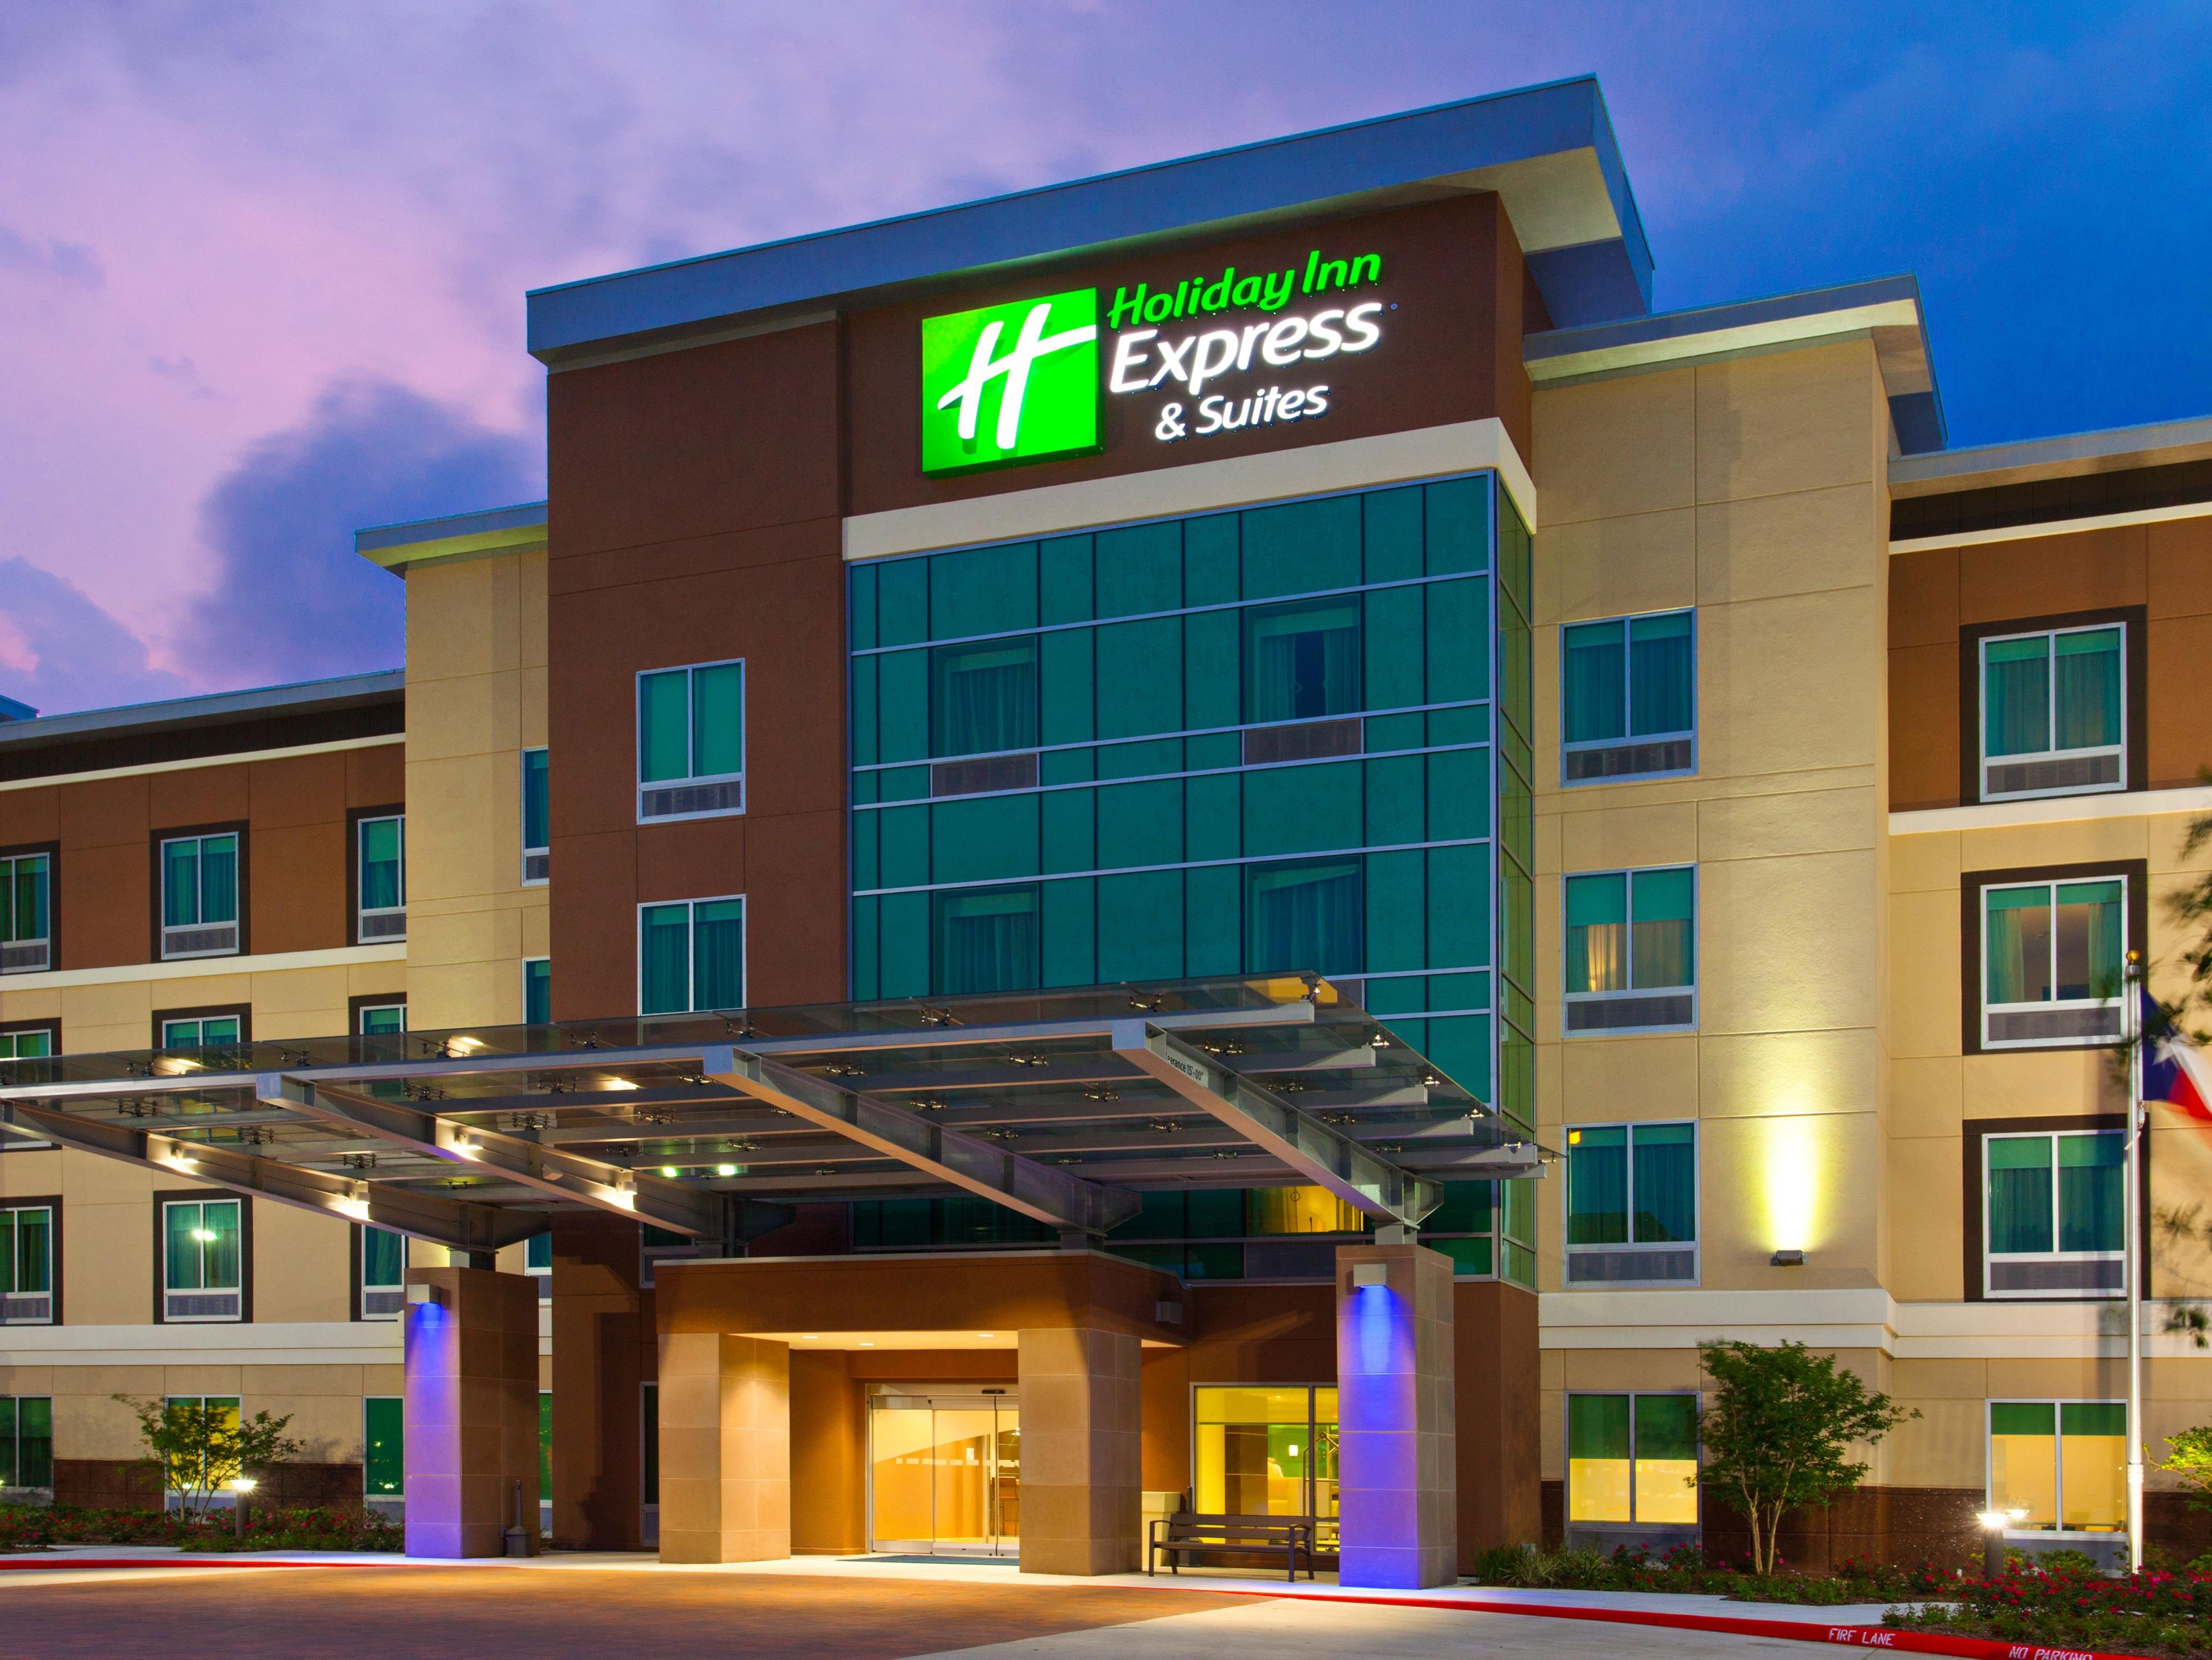 Holiday Inn Express And Suites Houston 4530298153 4x3